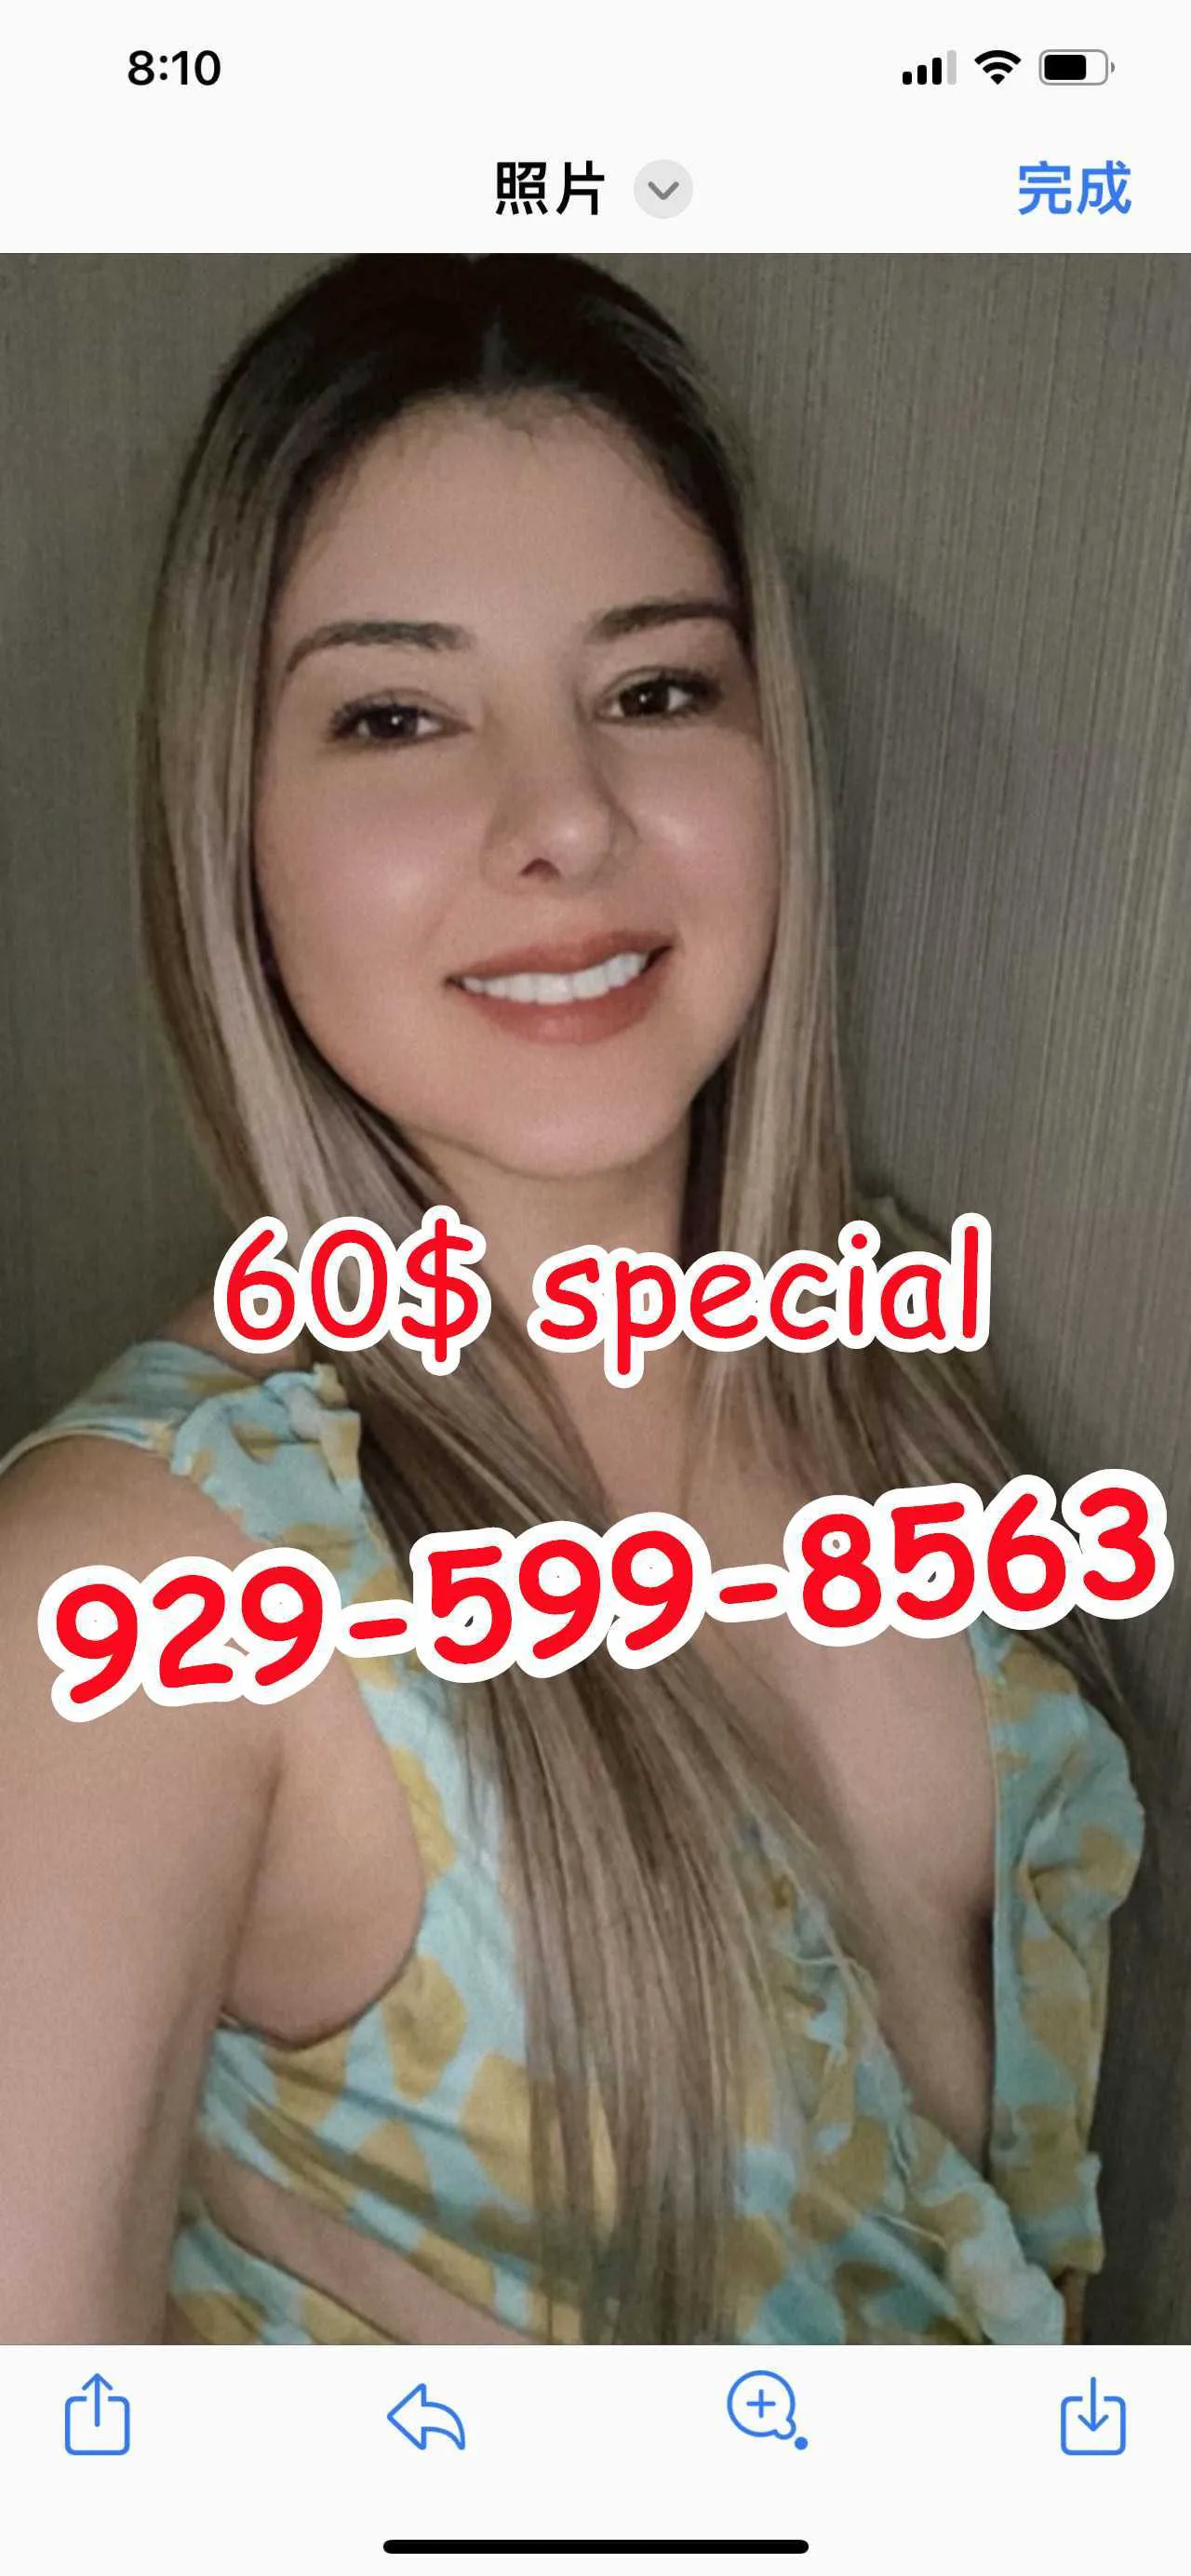 Reviews about escort with phone number 9295998563